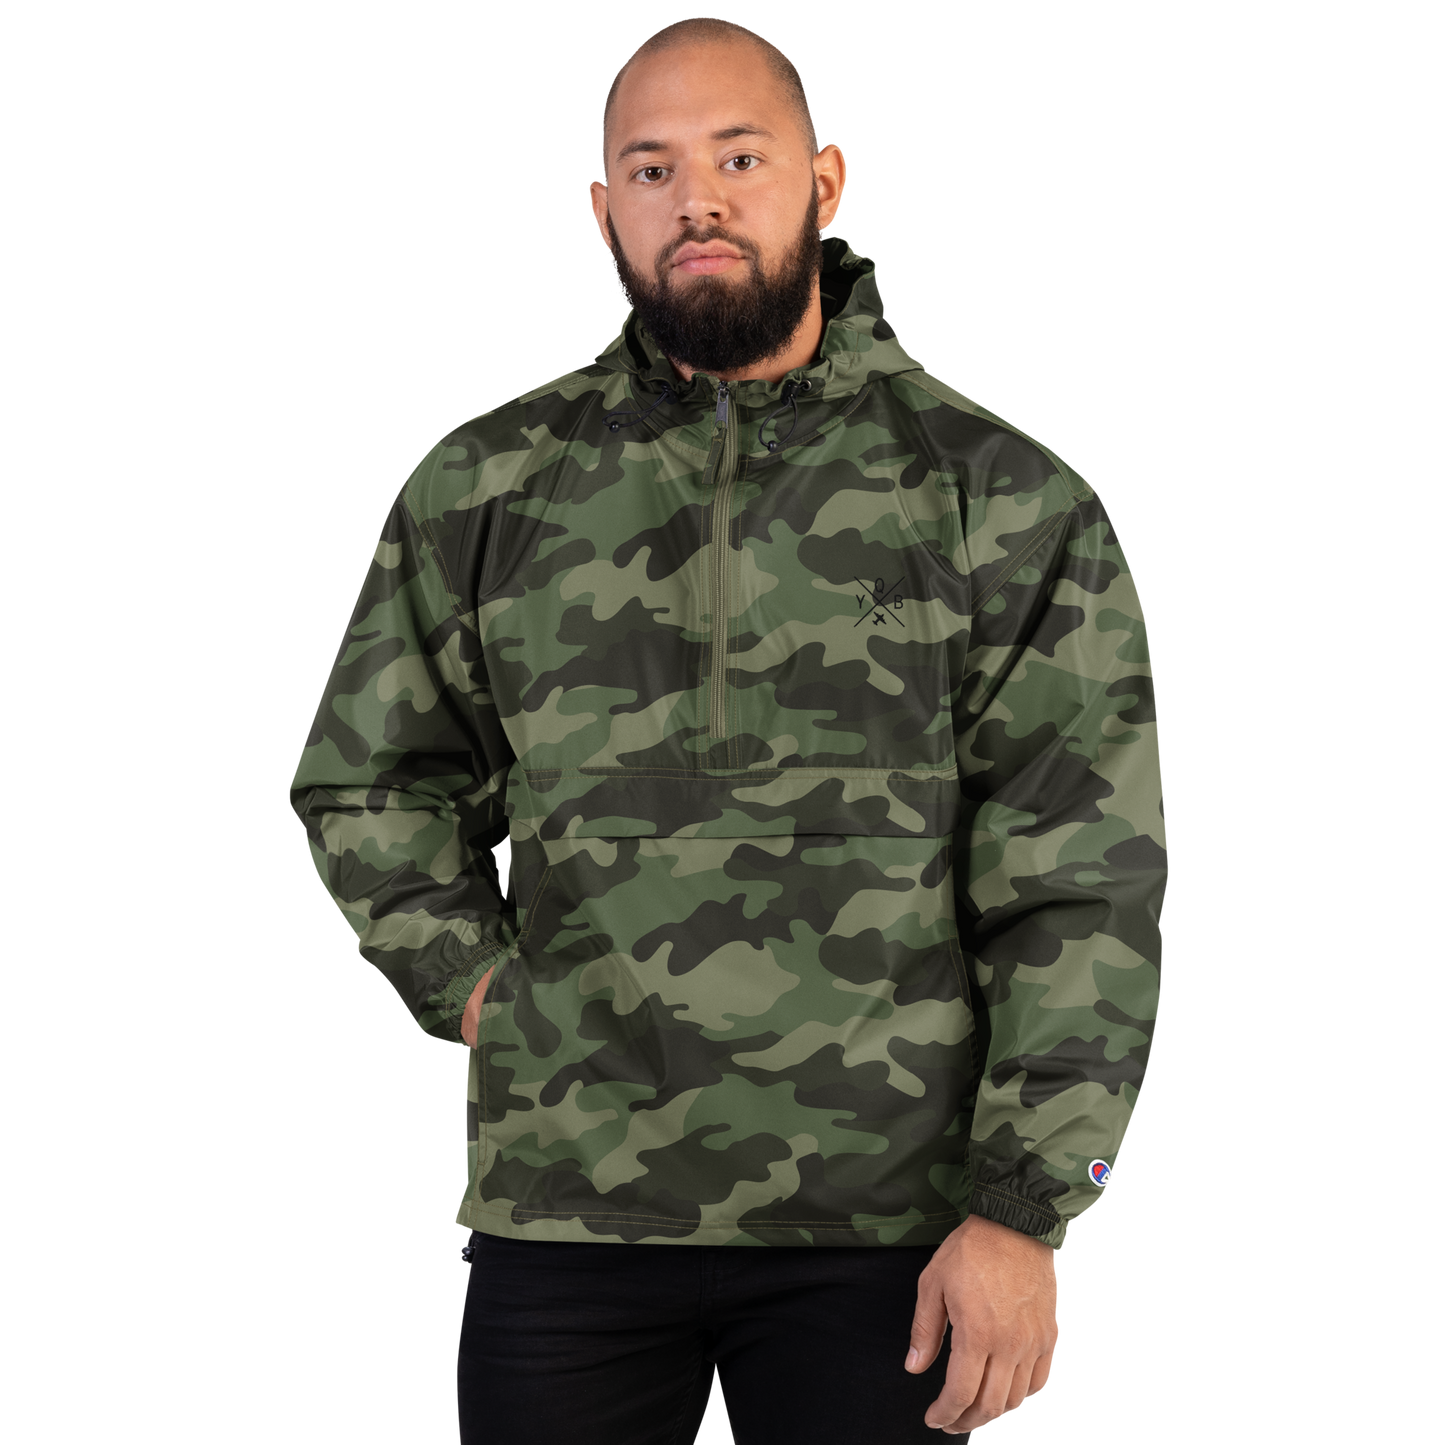 Crossed-X Packable Jacket • YQB Quebec City • YHM Designs - Image 13